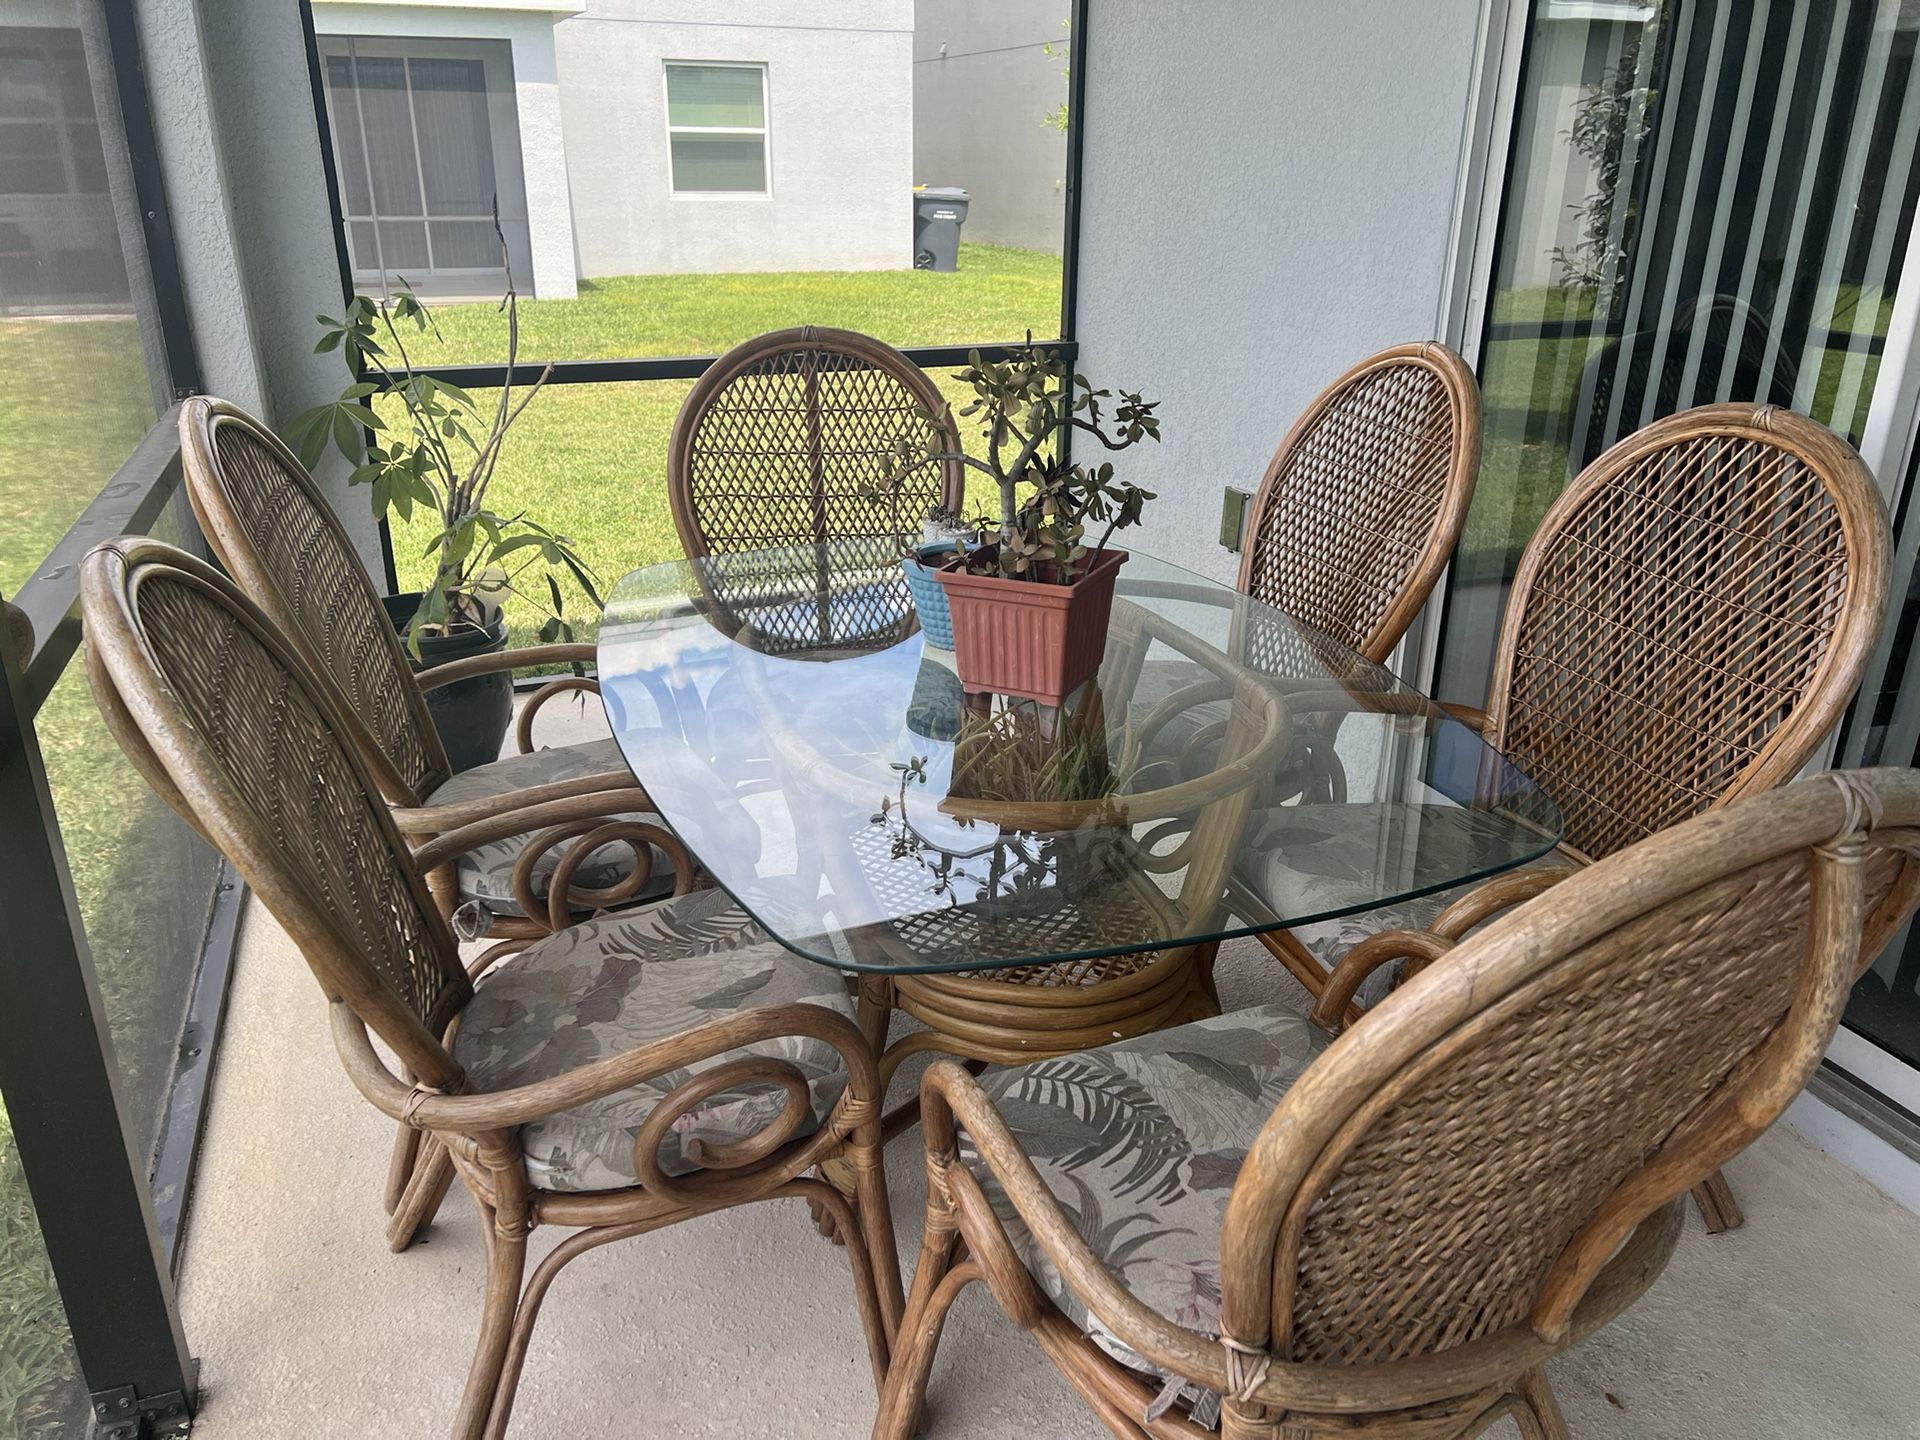 Patio Dining and lounge furniture